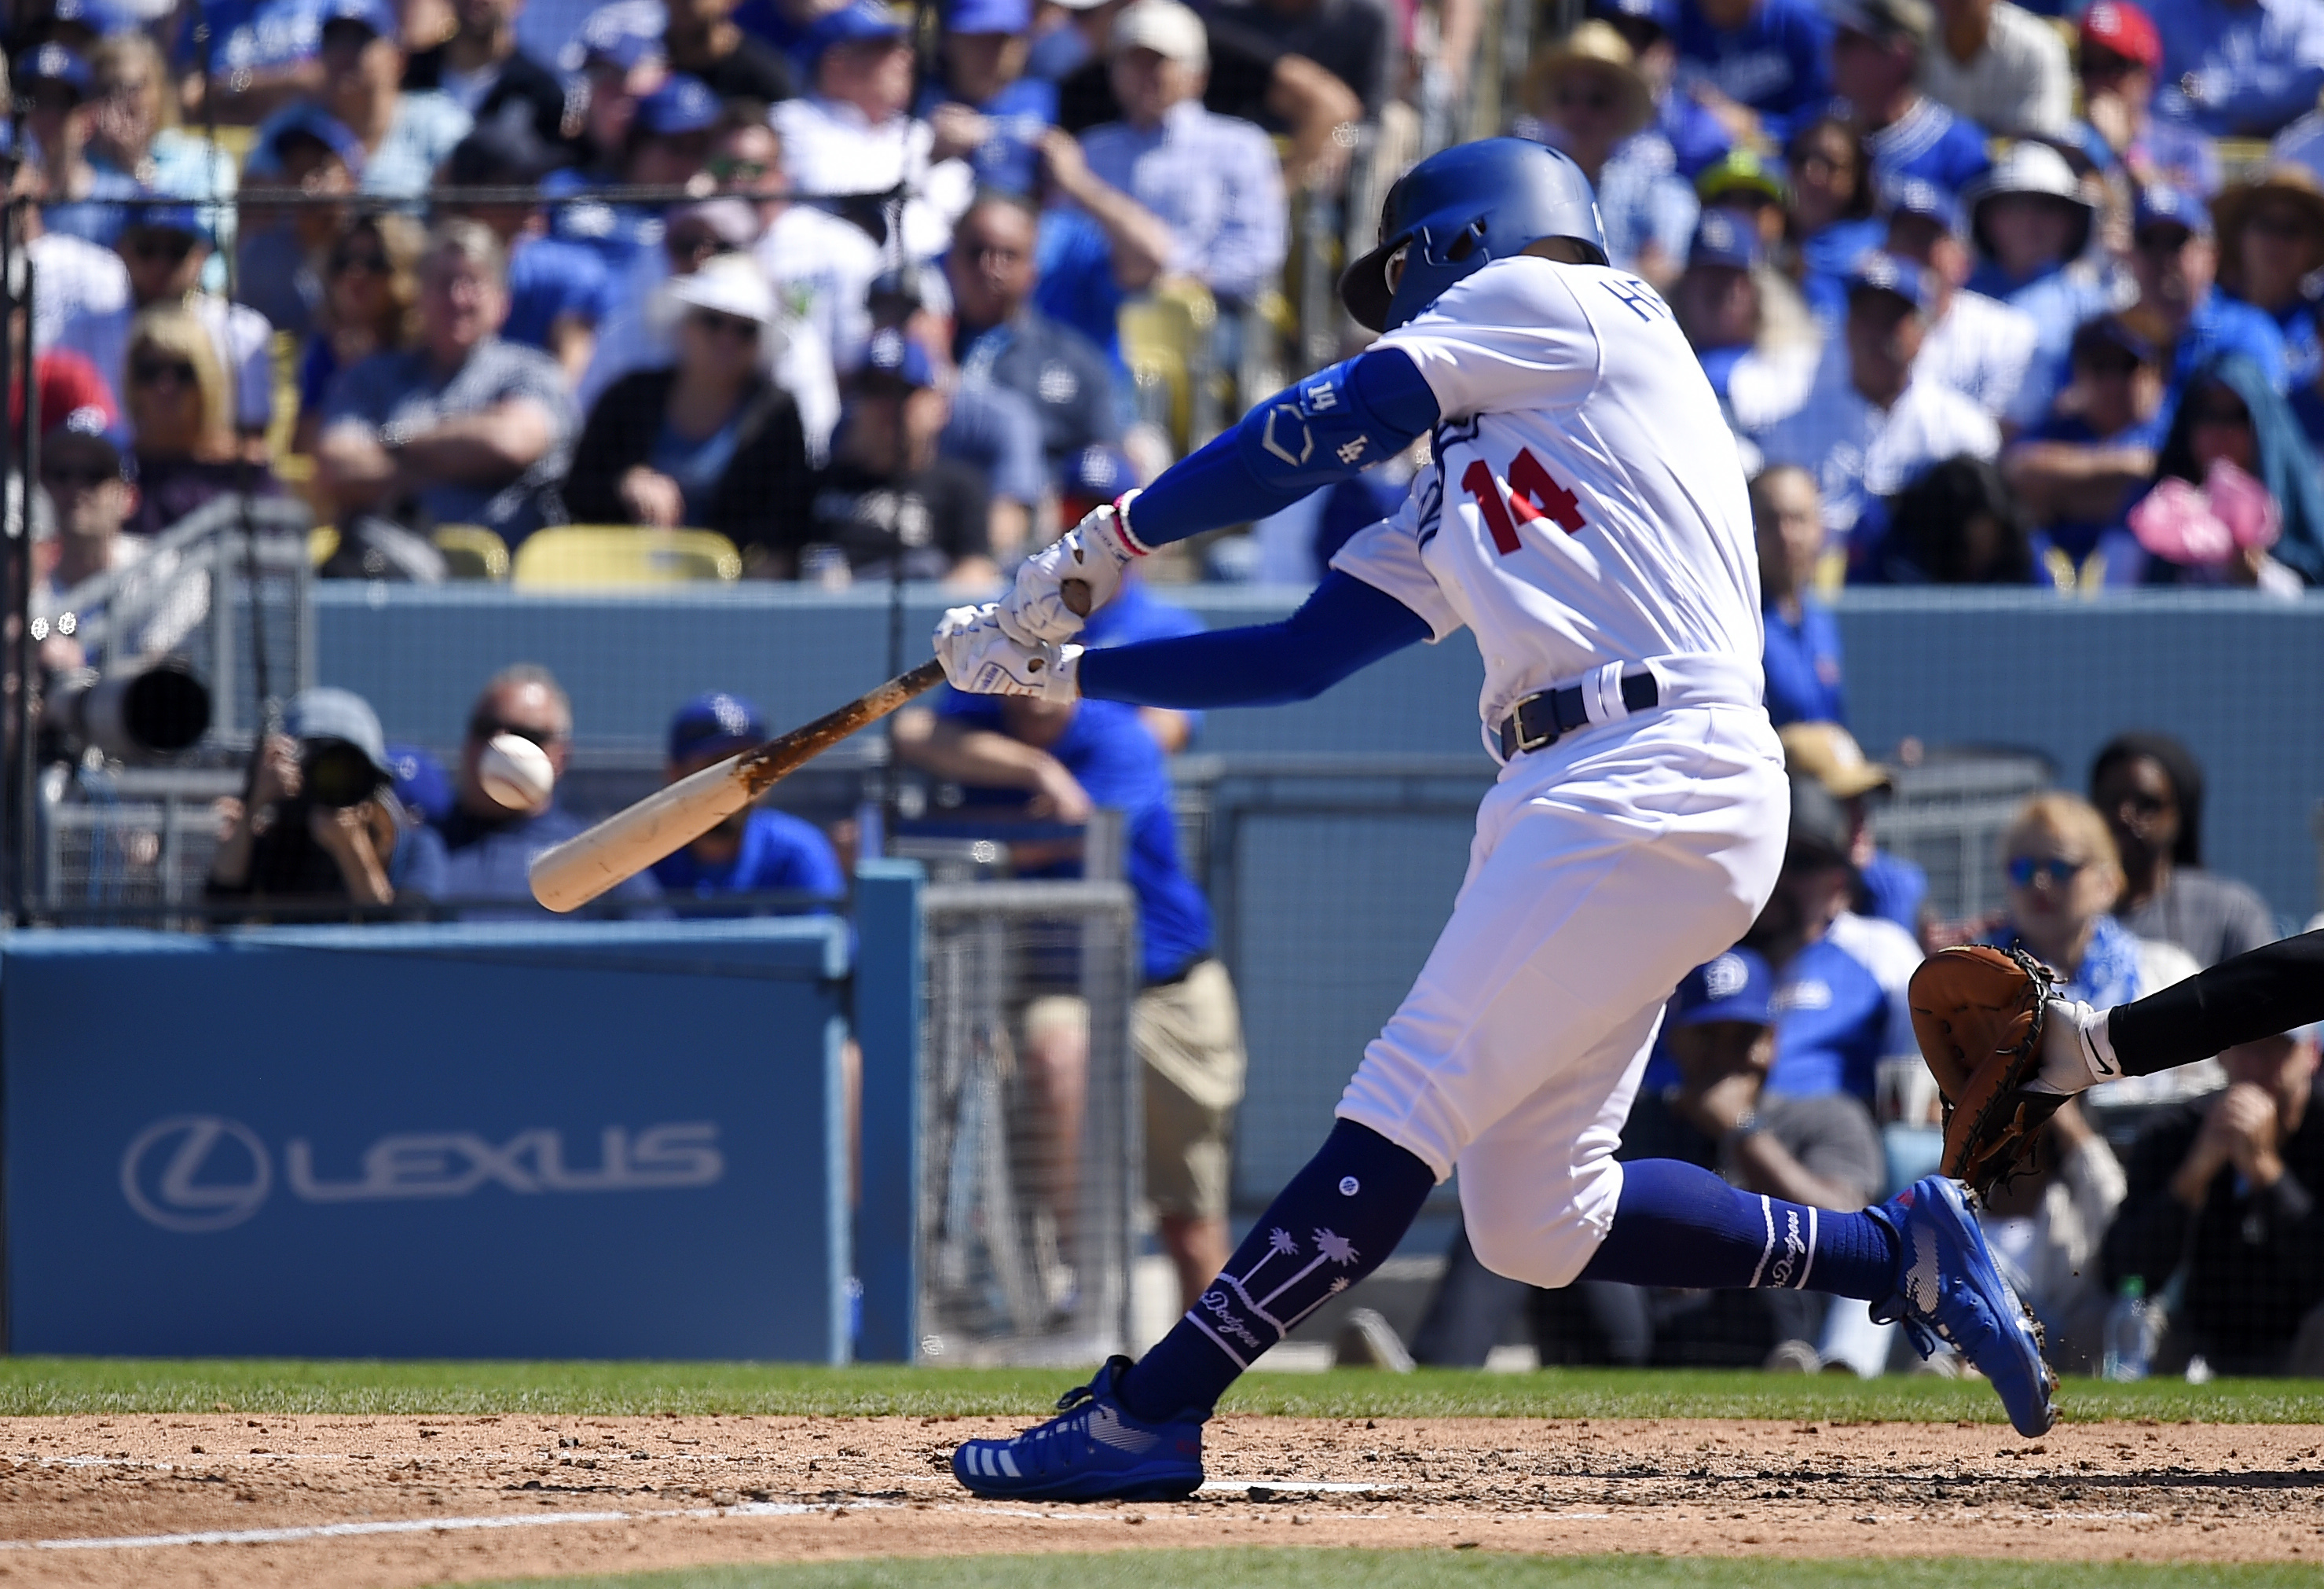 Dodgers set opening day mark with 8 HRs in win over Arizona